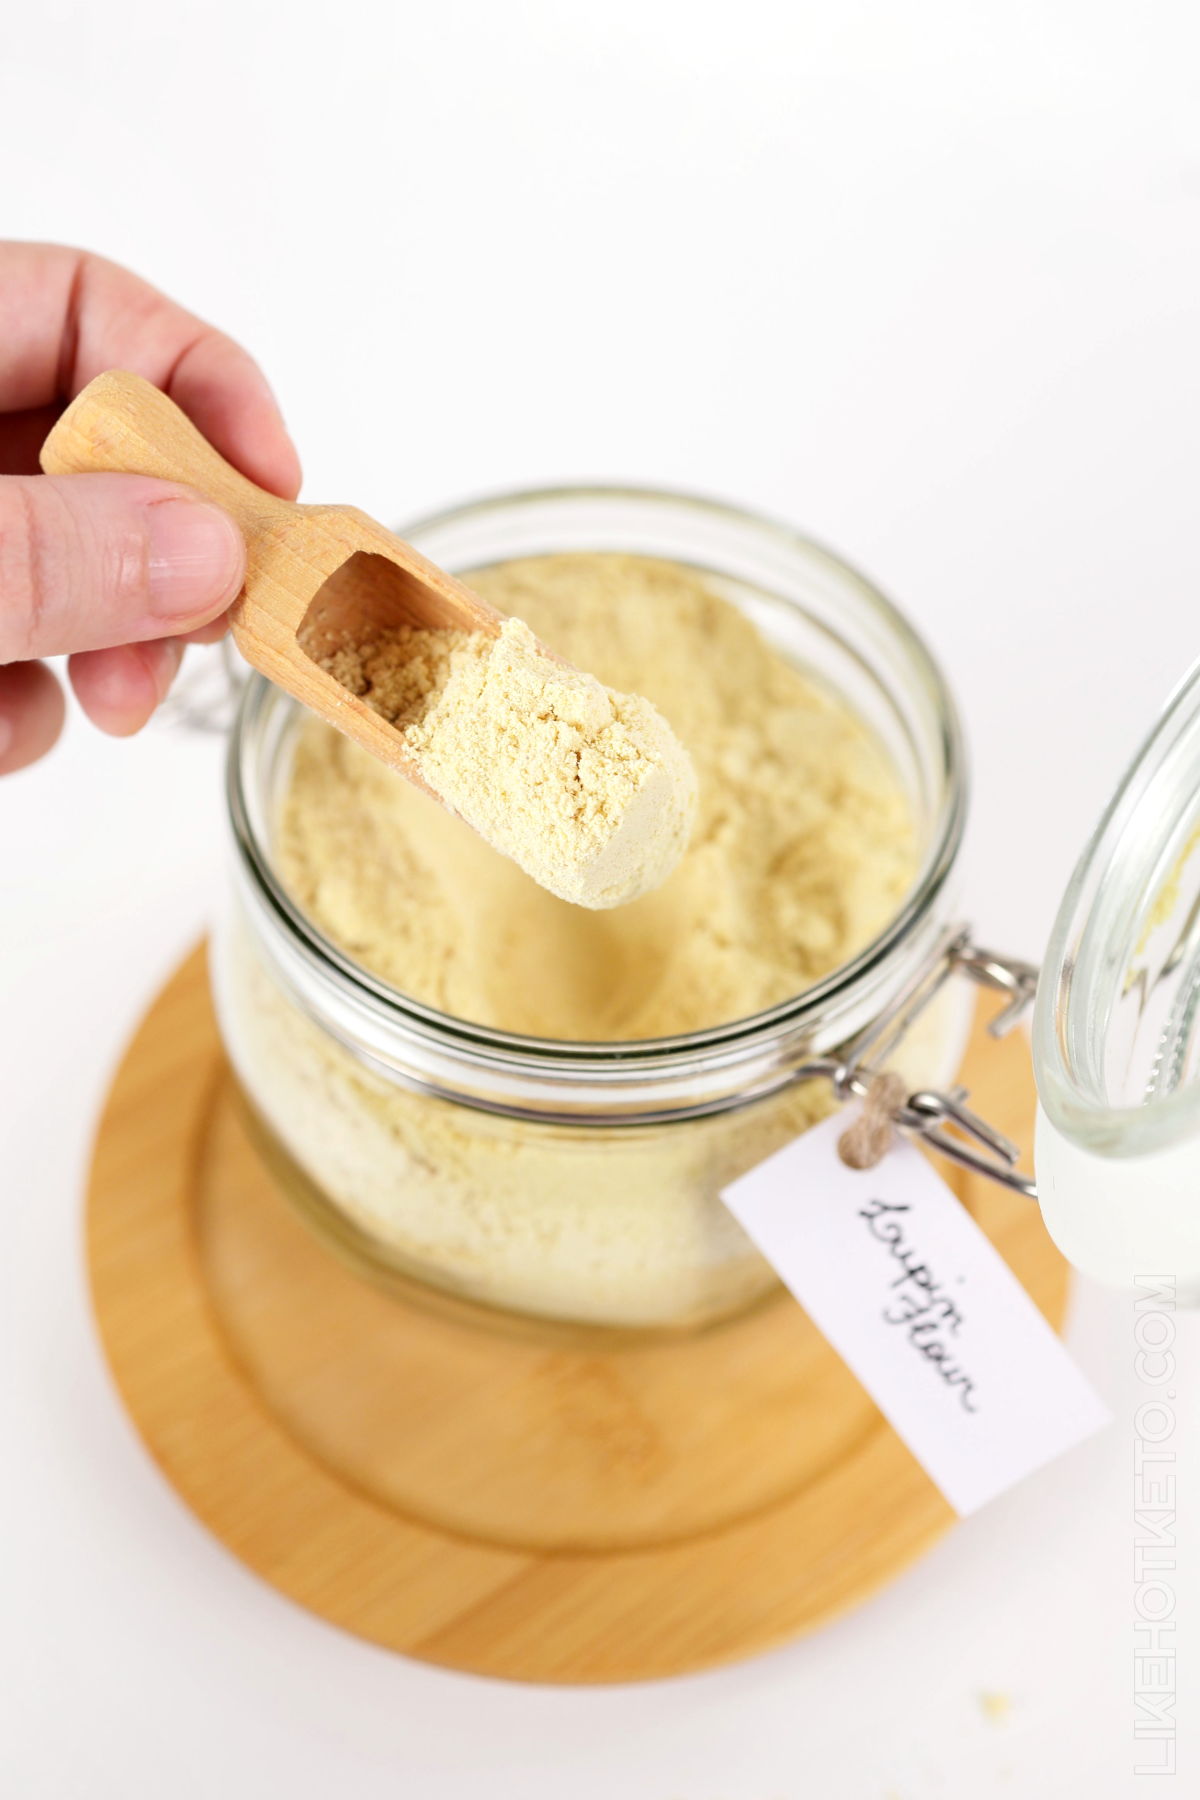 Taking lupin flour from a labeled jar with a wooden spoon.